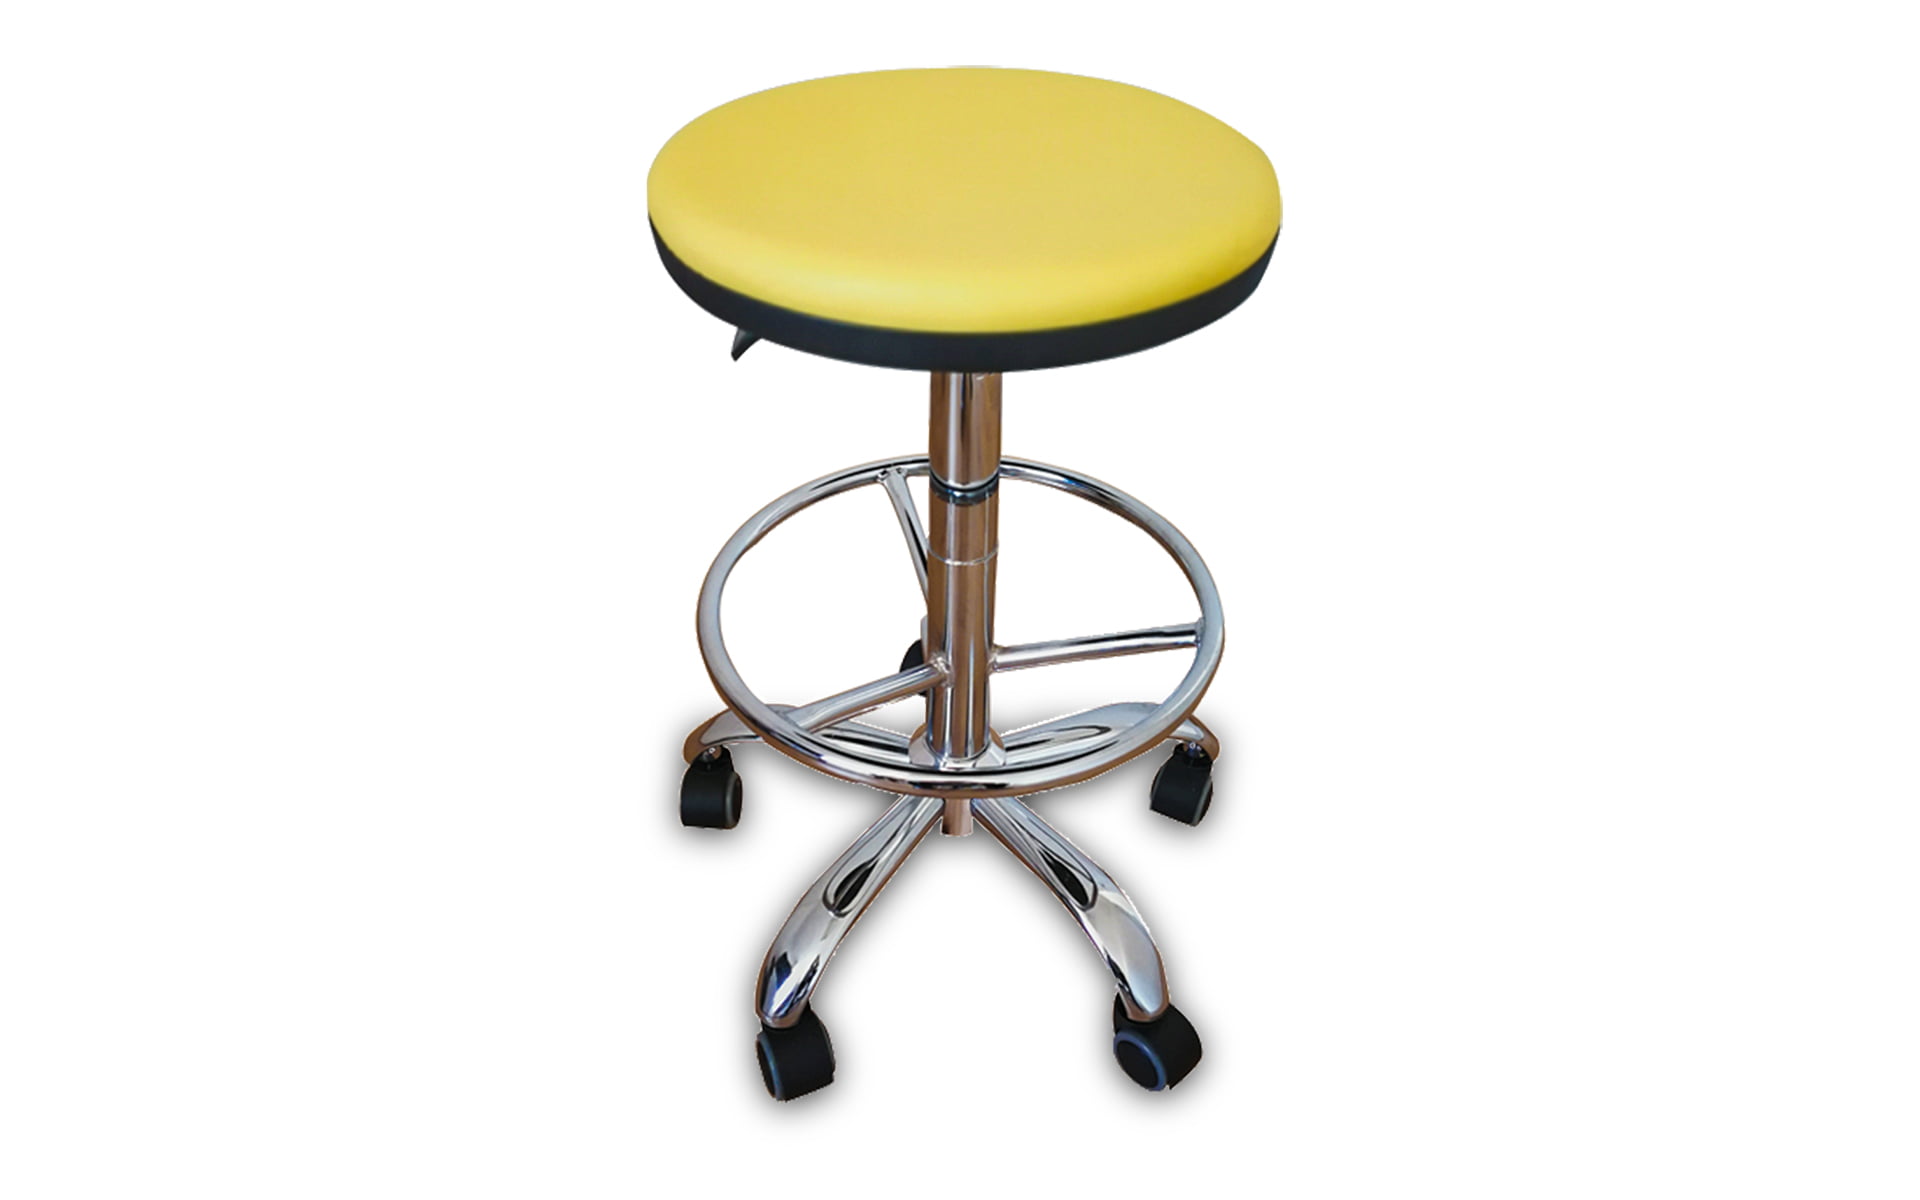 Height Adjustable Stool with Foot Rest